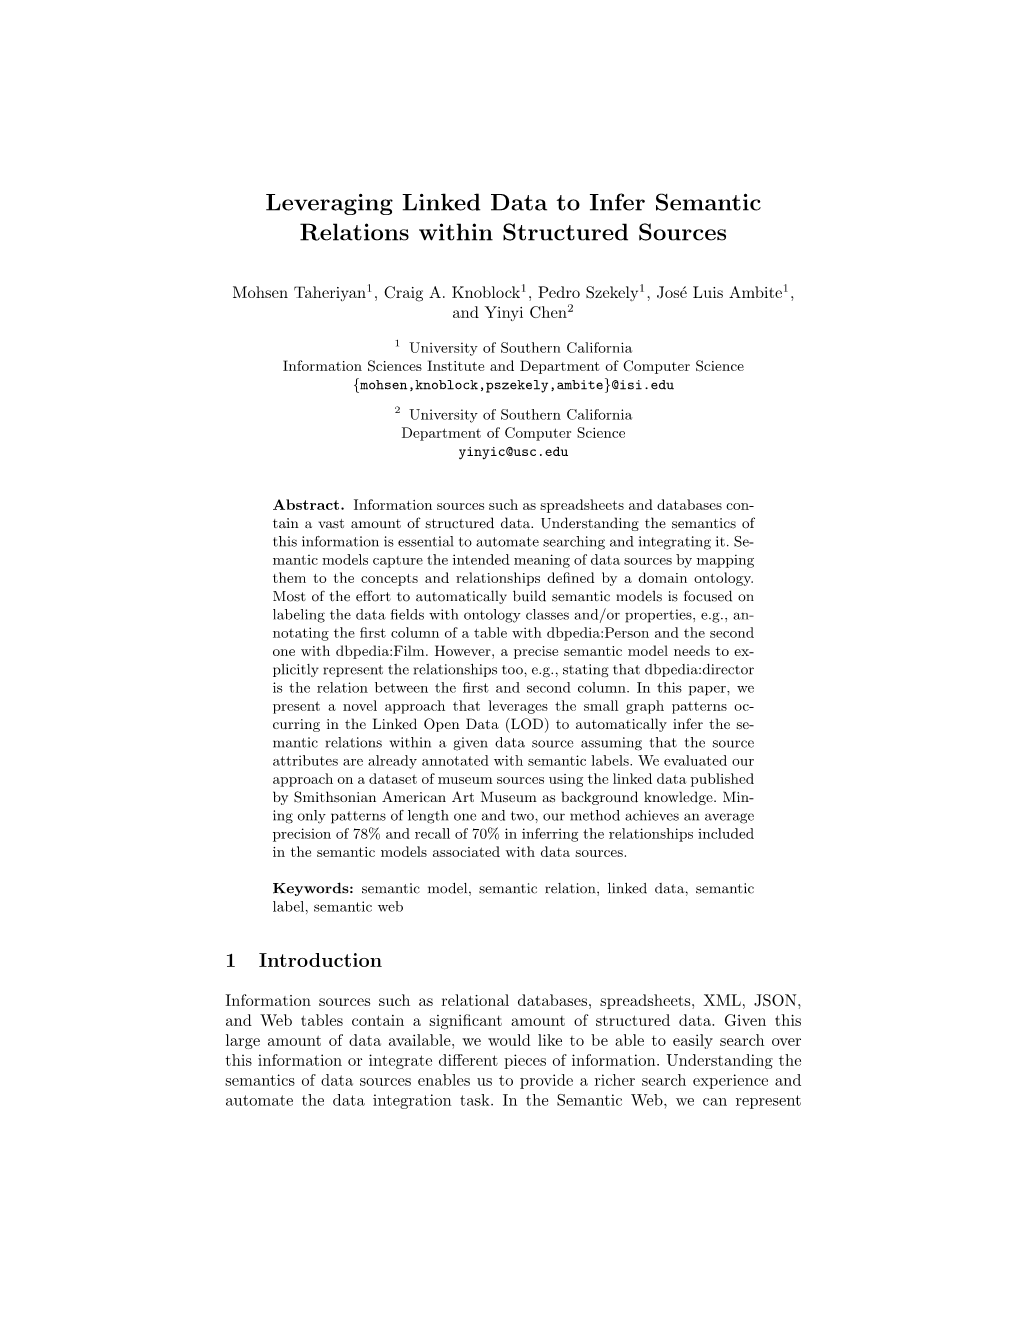 Leveraging Linked Data to Infer Semantic Relations Within Structured Sources